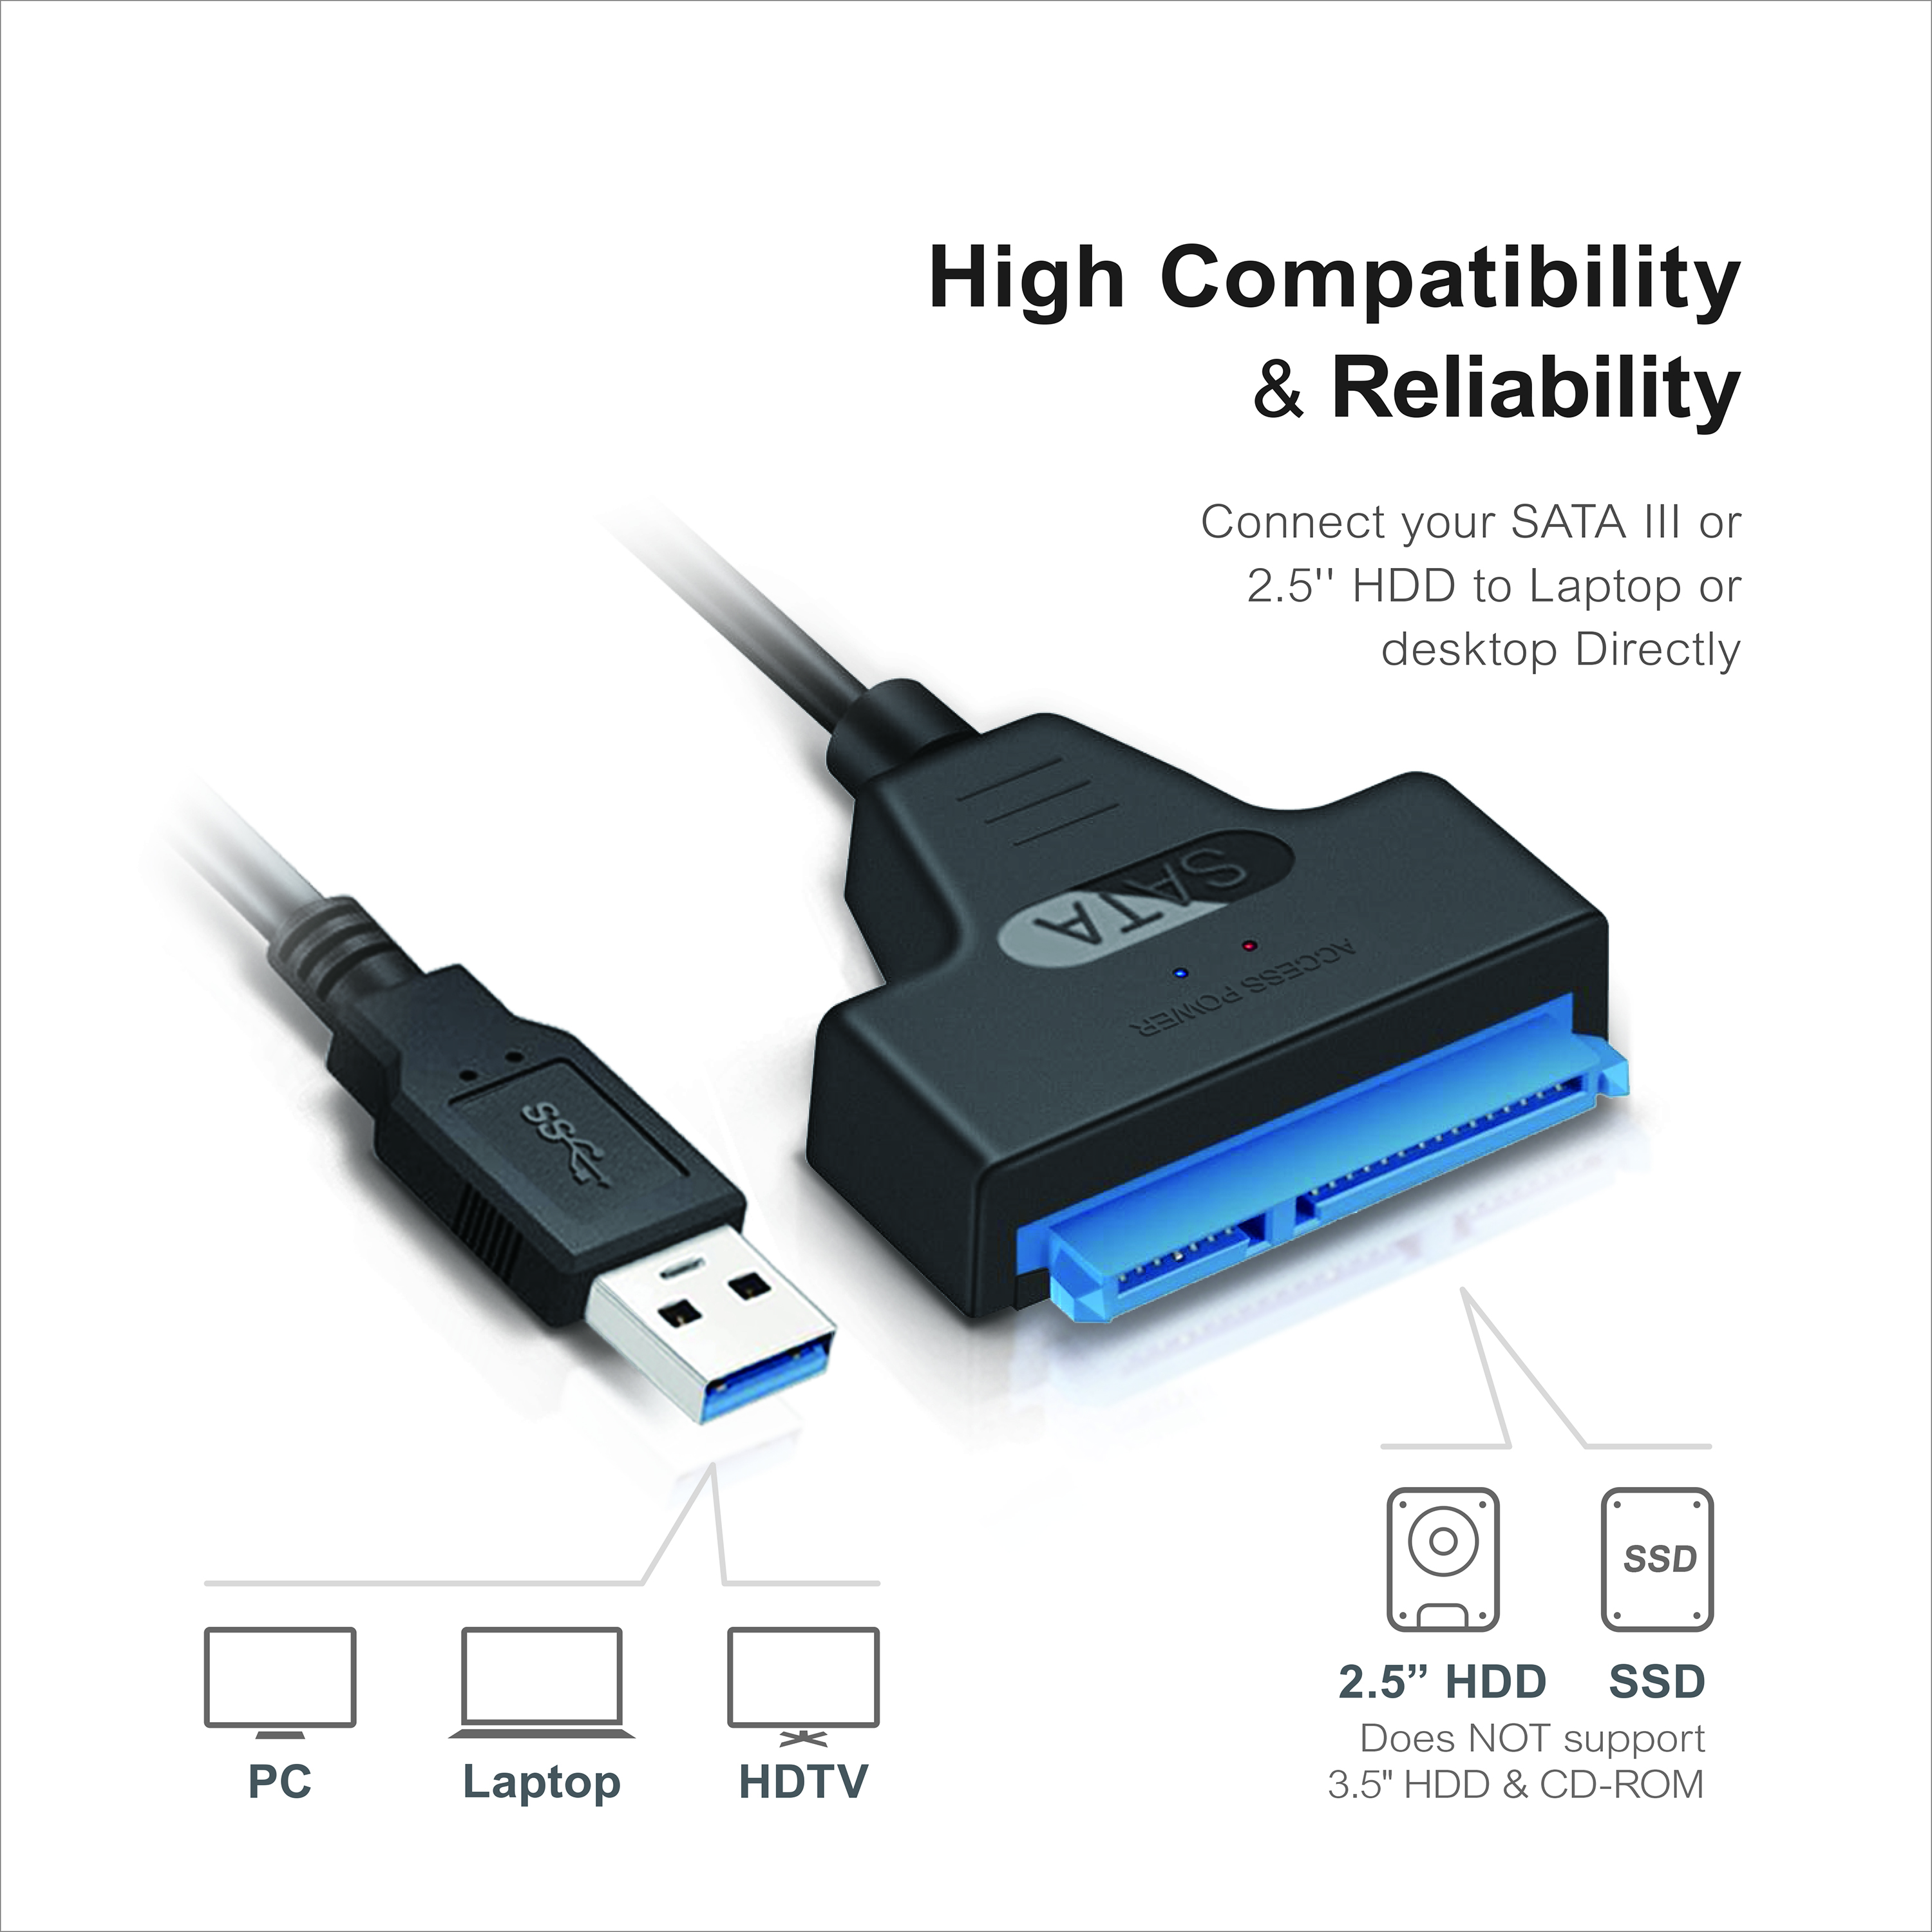 Mediasonic SATA to USB Cable – USB 3.0 / USB 3.1 Gen 1 to 2.5” SATA SSD / Hard Drive Adapter Cable (Optimized for SSD, Support UASP and SATA 3 6.0Gbps transfer rate) (HND5-SU3) - image 3 of 6